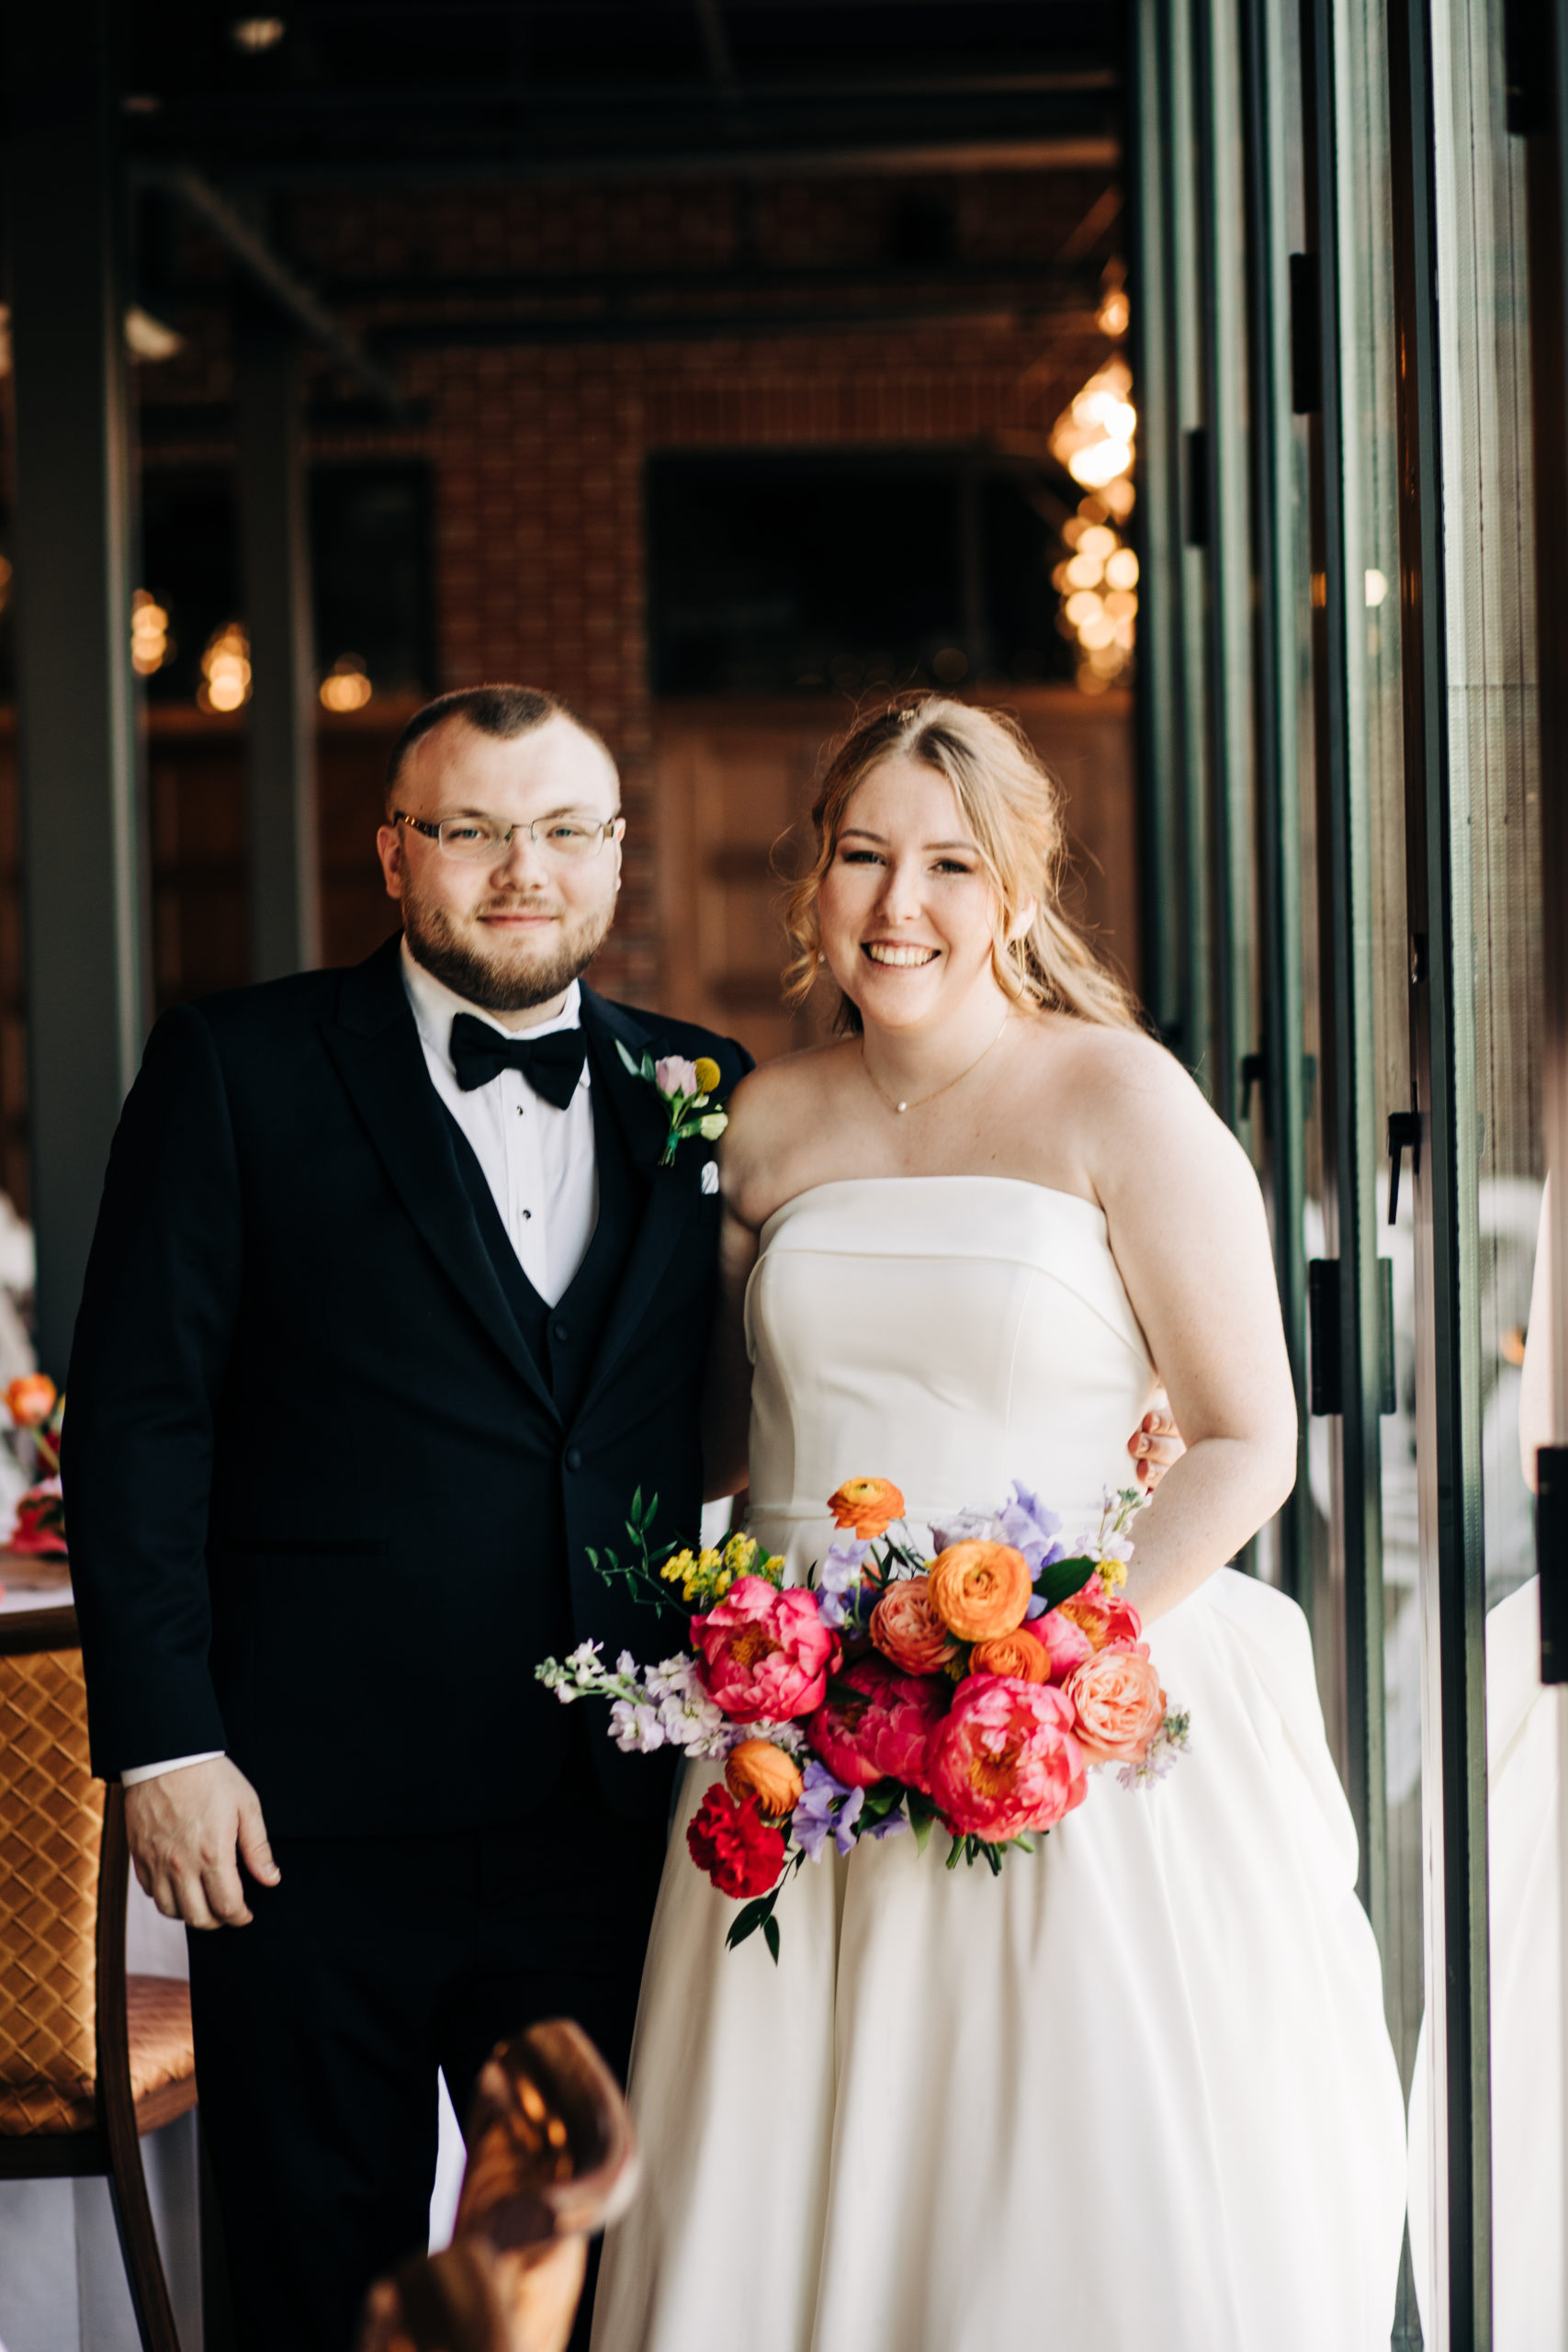 Bride and Groom Portrait at Frankenmuth Brewery wedding in Michigan